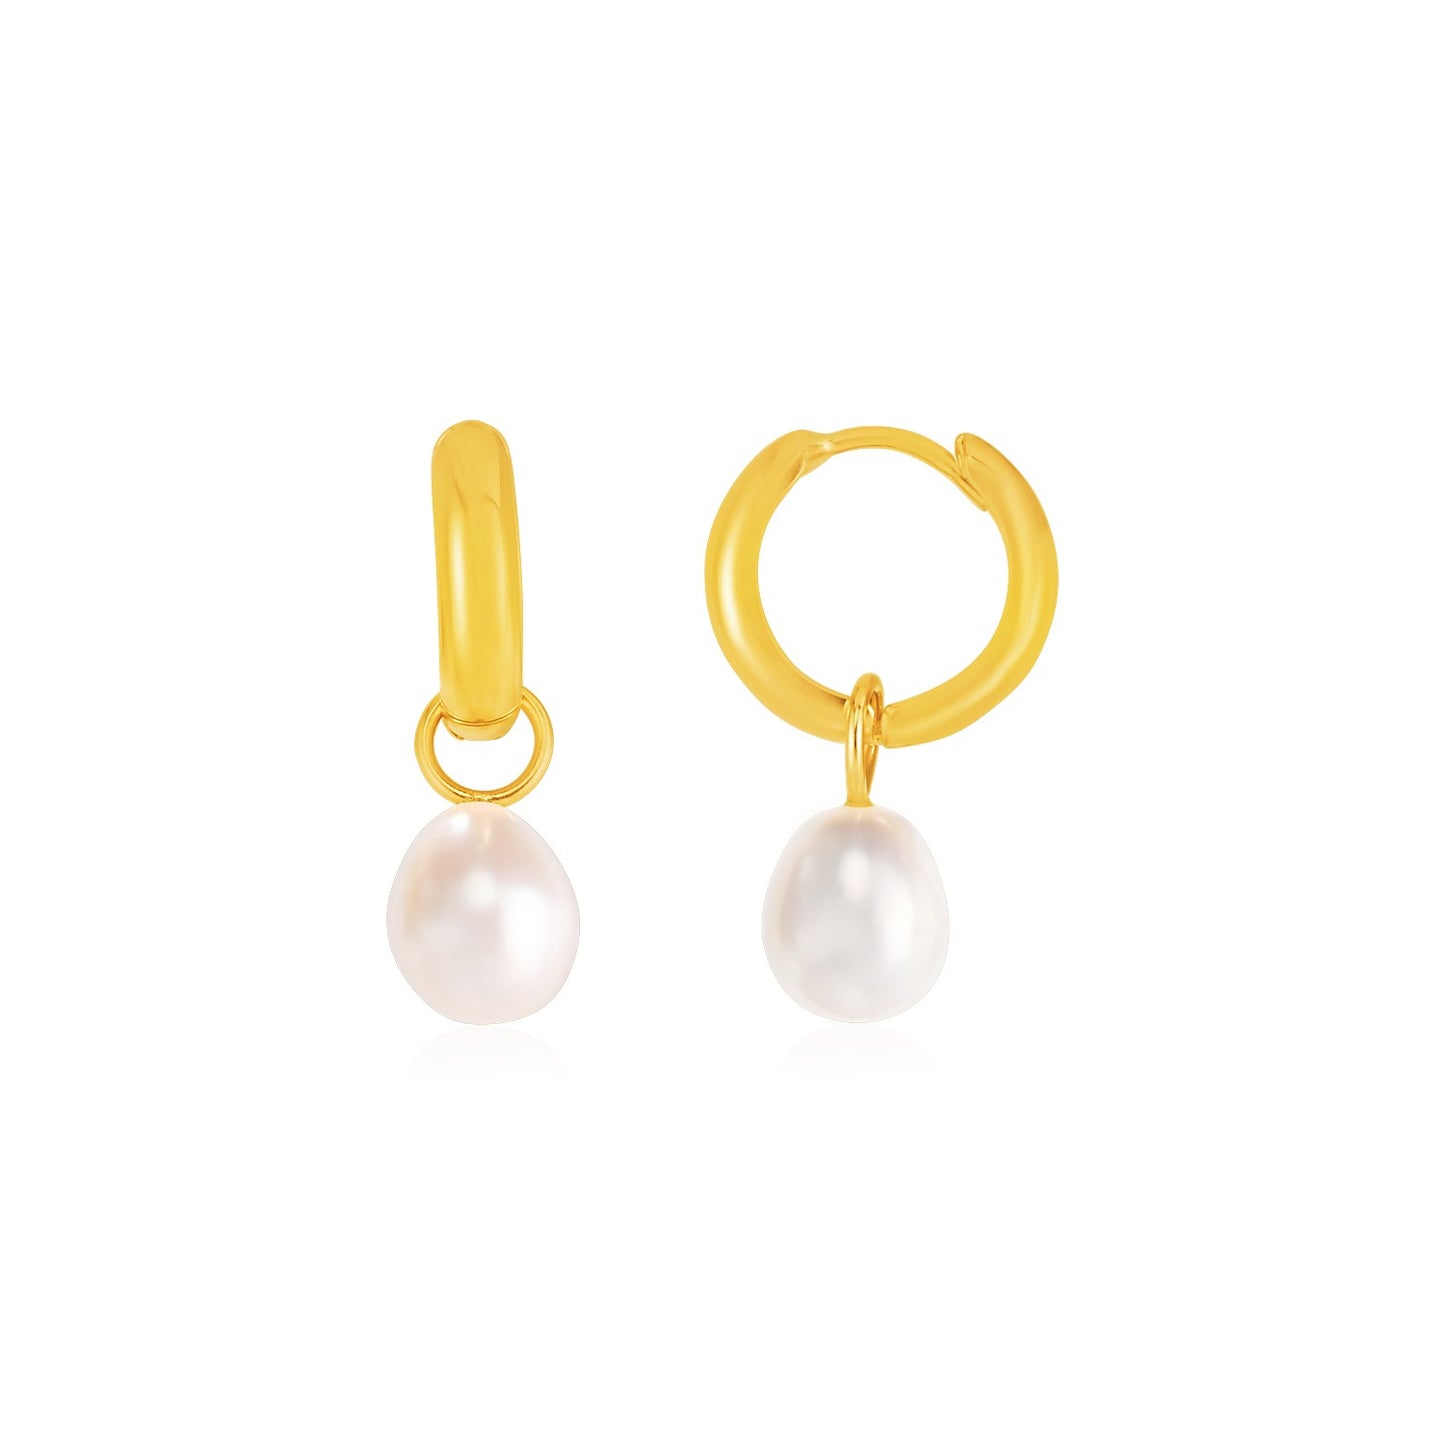 14k Yellow Gold Small Hoop Earrings with Pearls